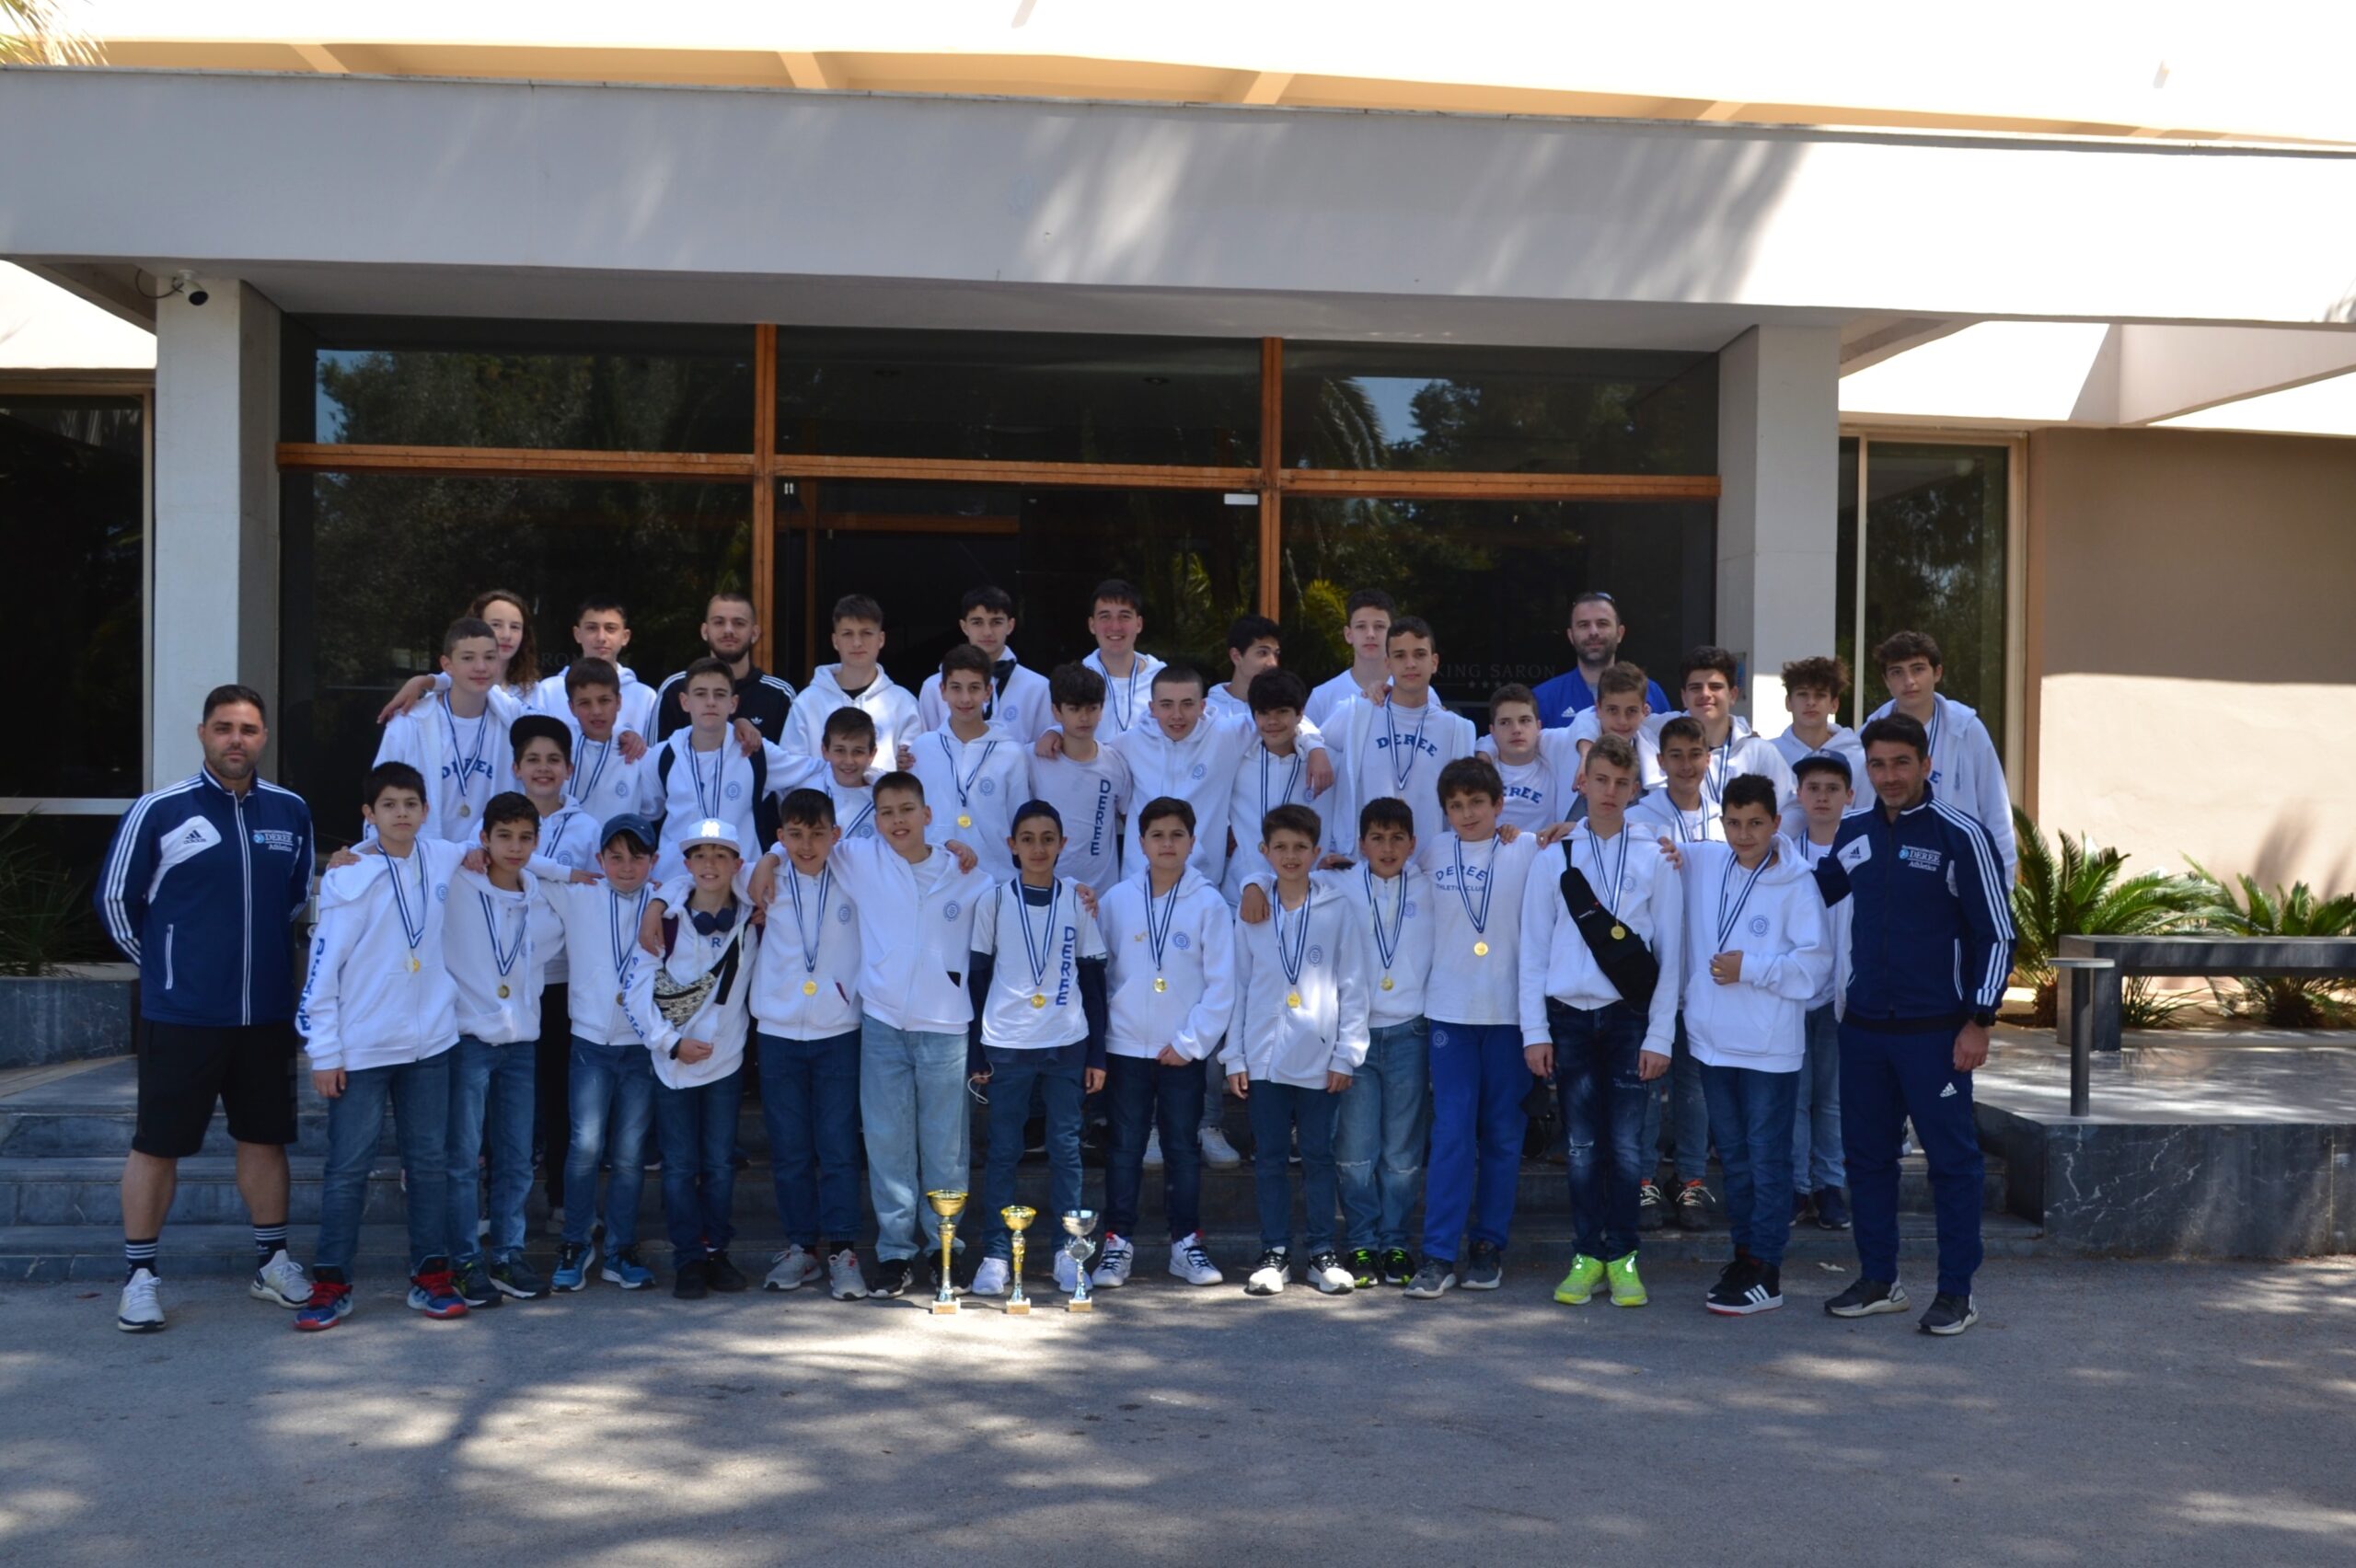 Very good performance and results for the Deree Soccer Academy at the “Isthmia Easter Camp 3”!